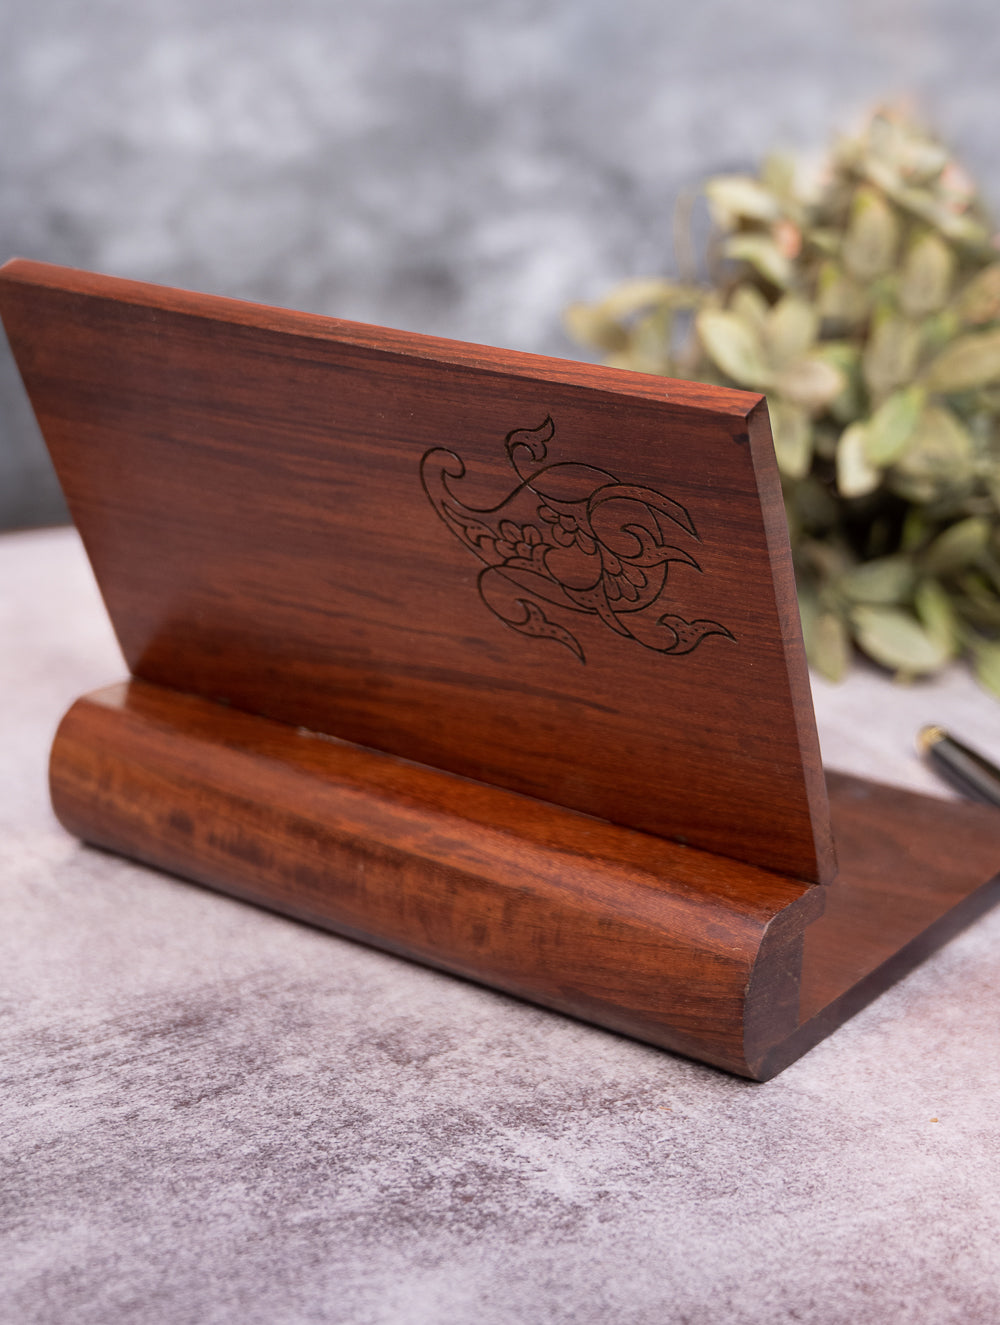 Load image into Gallery viewer, Wood Engraved Paisley Paper Holder